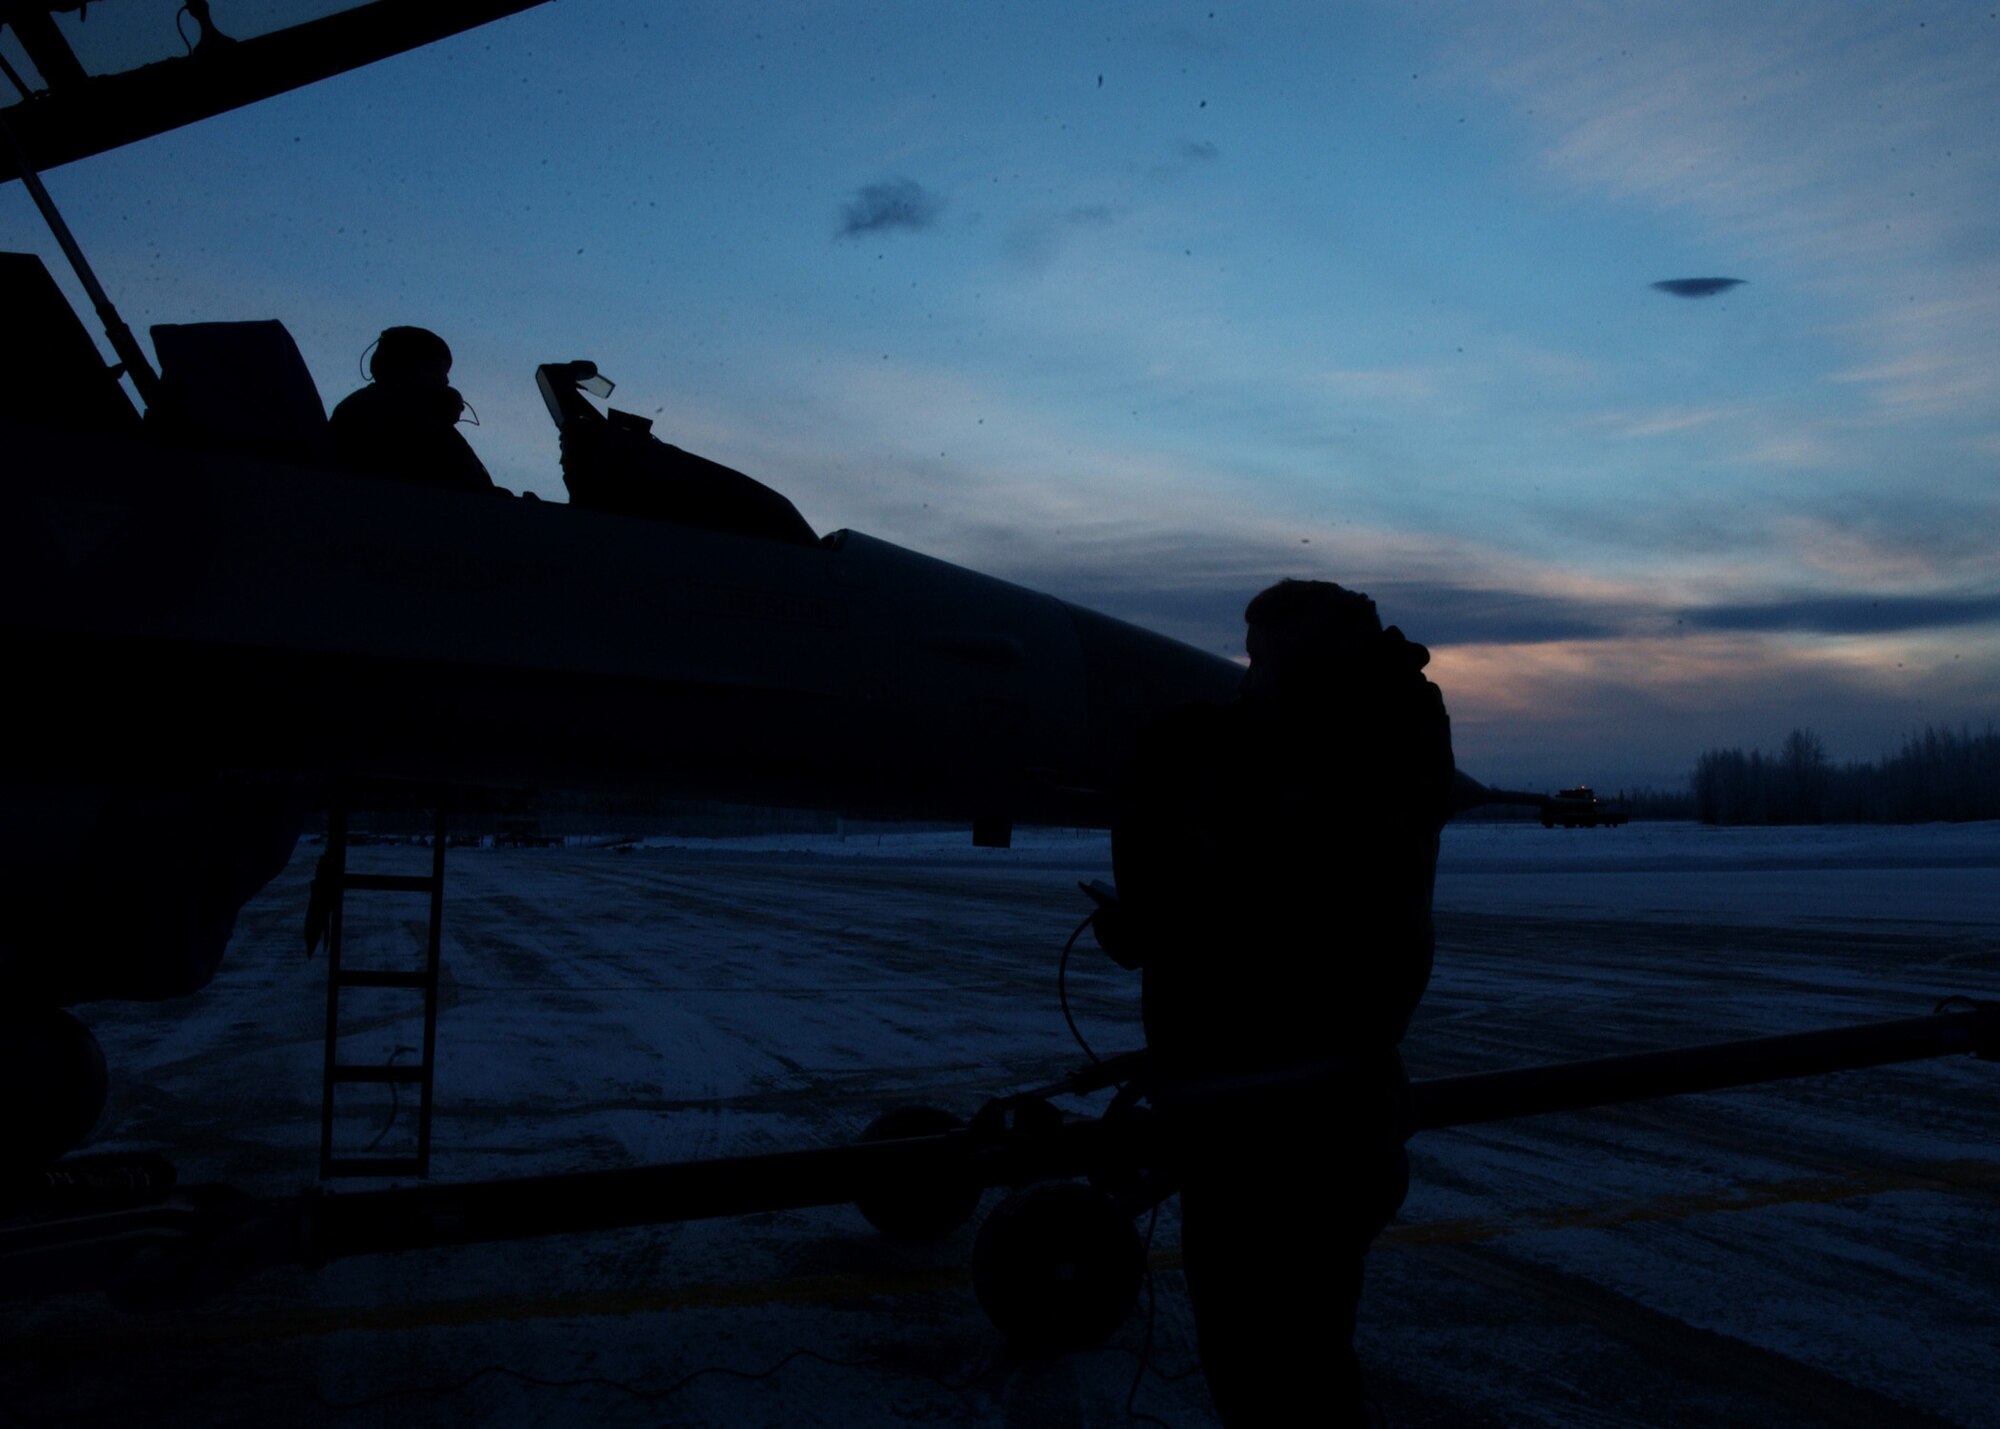 EIELSON AIR FORCE BASE, Alaska -- Staff Sgt. John Eby and Technical Sgt. Eldon Arnaud (sitting in the cockpit), 354 Aircraft Maintenance Squadron, de-fuel an F-16 Fighting Falcon on the Flight Line, Dec. 21. Today is Winter Solstice, the shortest day of the year. At Eielson Air Force Base the sun rose at 1052 and set at 1441 today resulting in a total of 3 hours and 49 minutes from sun up to sun down. This night will be extra dark due to the moon being completely below the horizon all day resulting in 0% moonlight illumination. 
(U.S. Air Force Photo by Airman Jonathan Snyder)